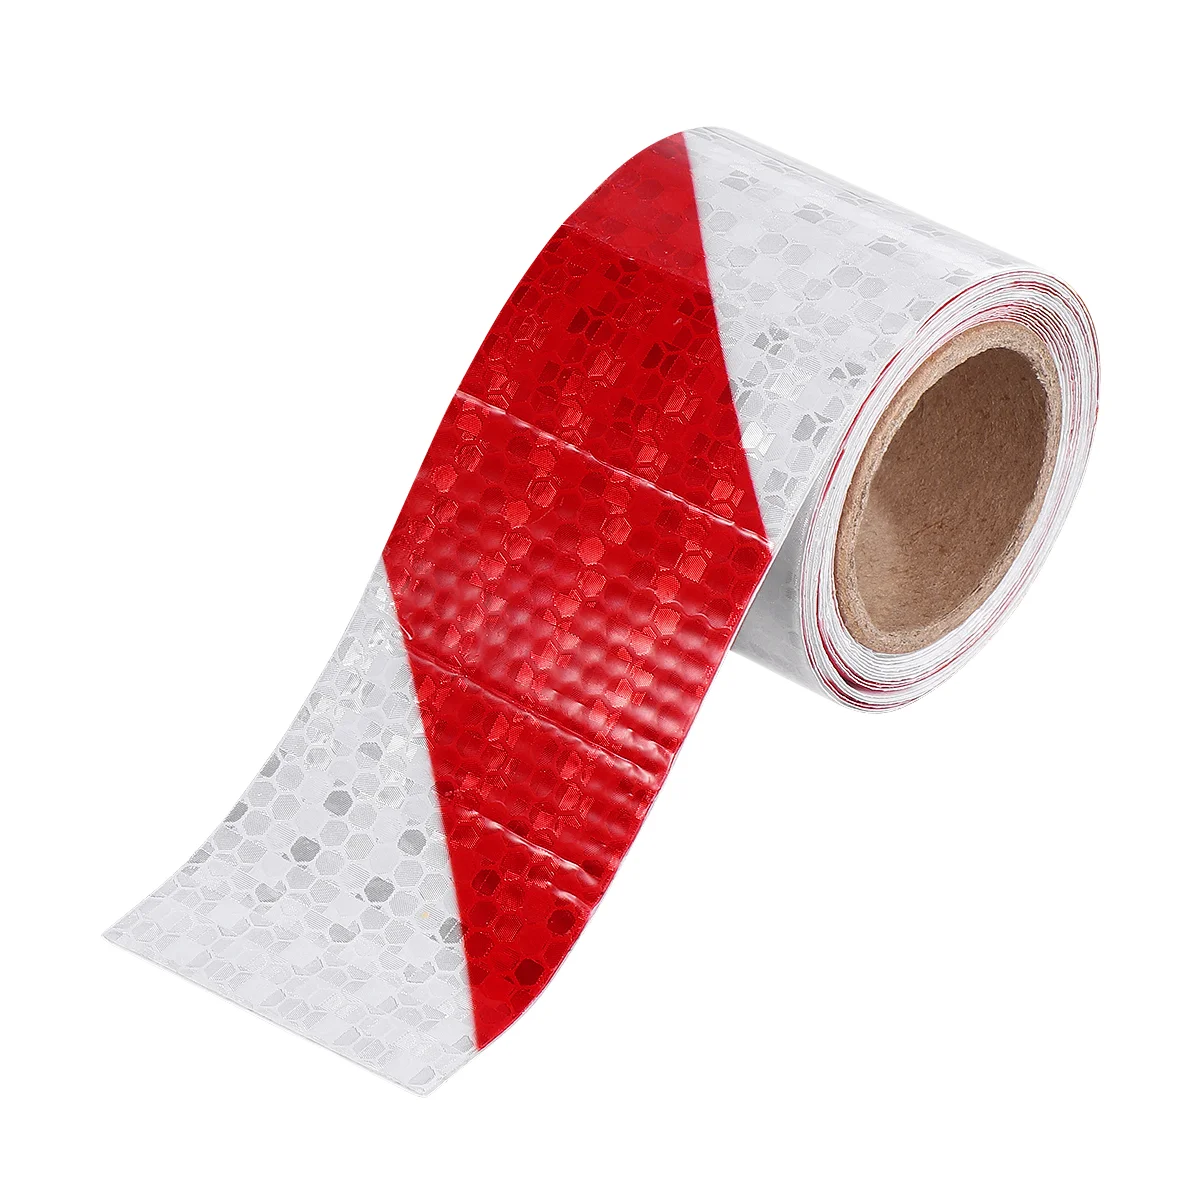 

Reflective Warning Tape Outdoor Red& White Reflector Tape High Visibility Hazard Caution Warning Safety Tape for Cars Trucks